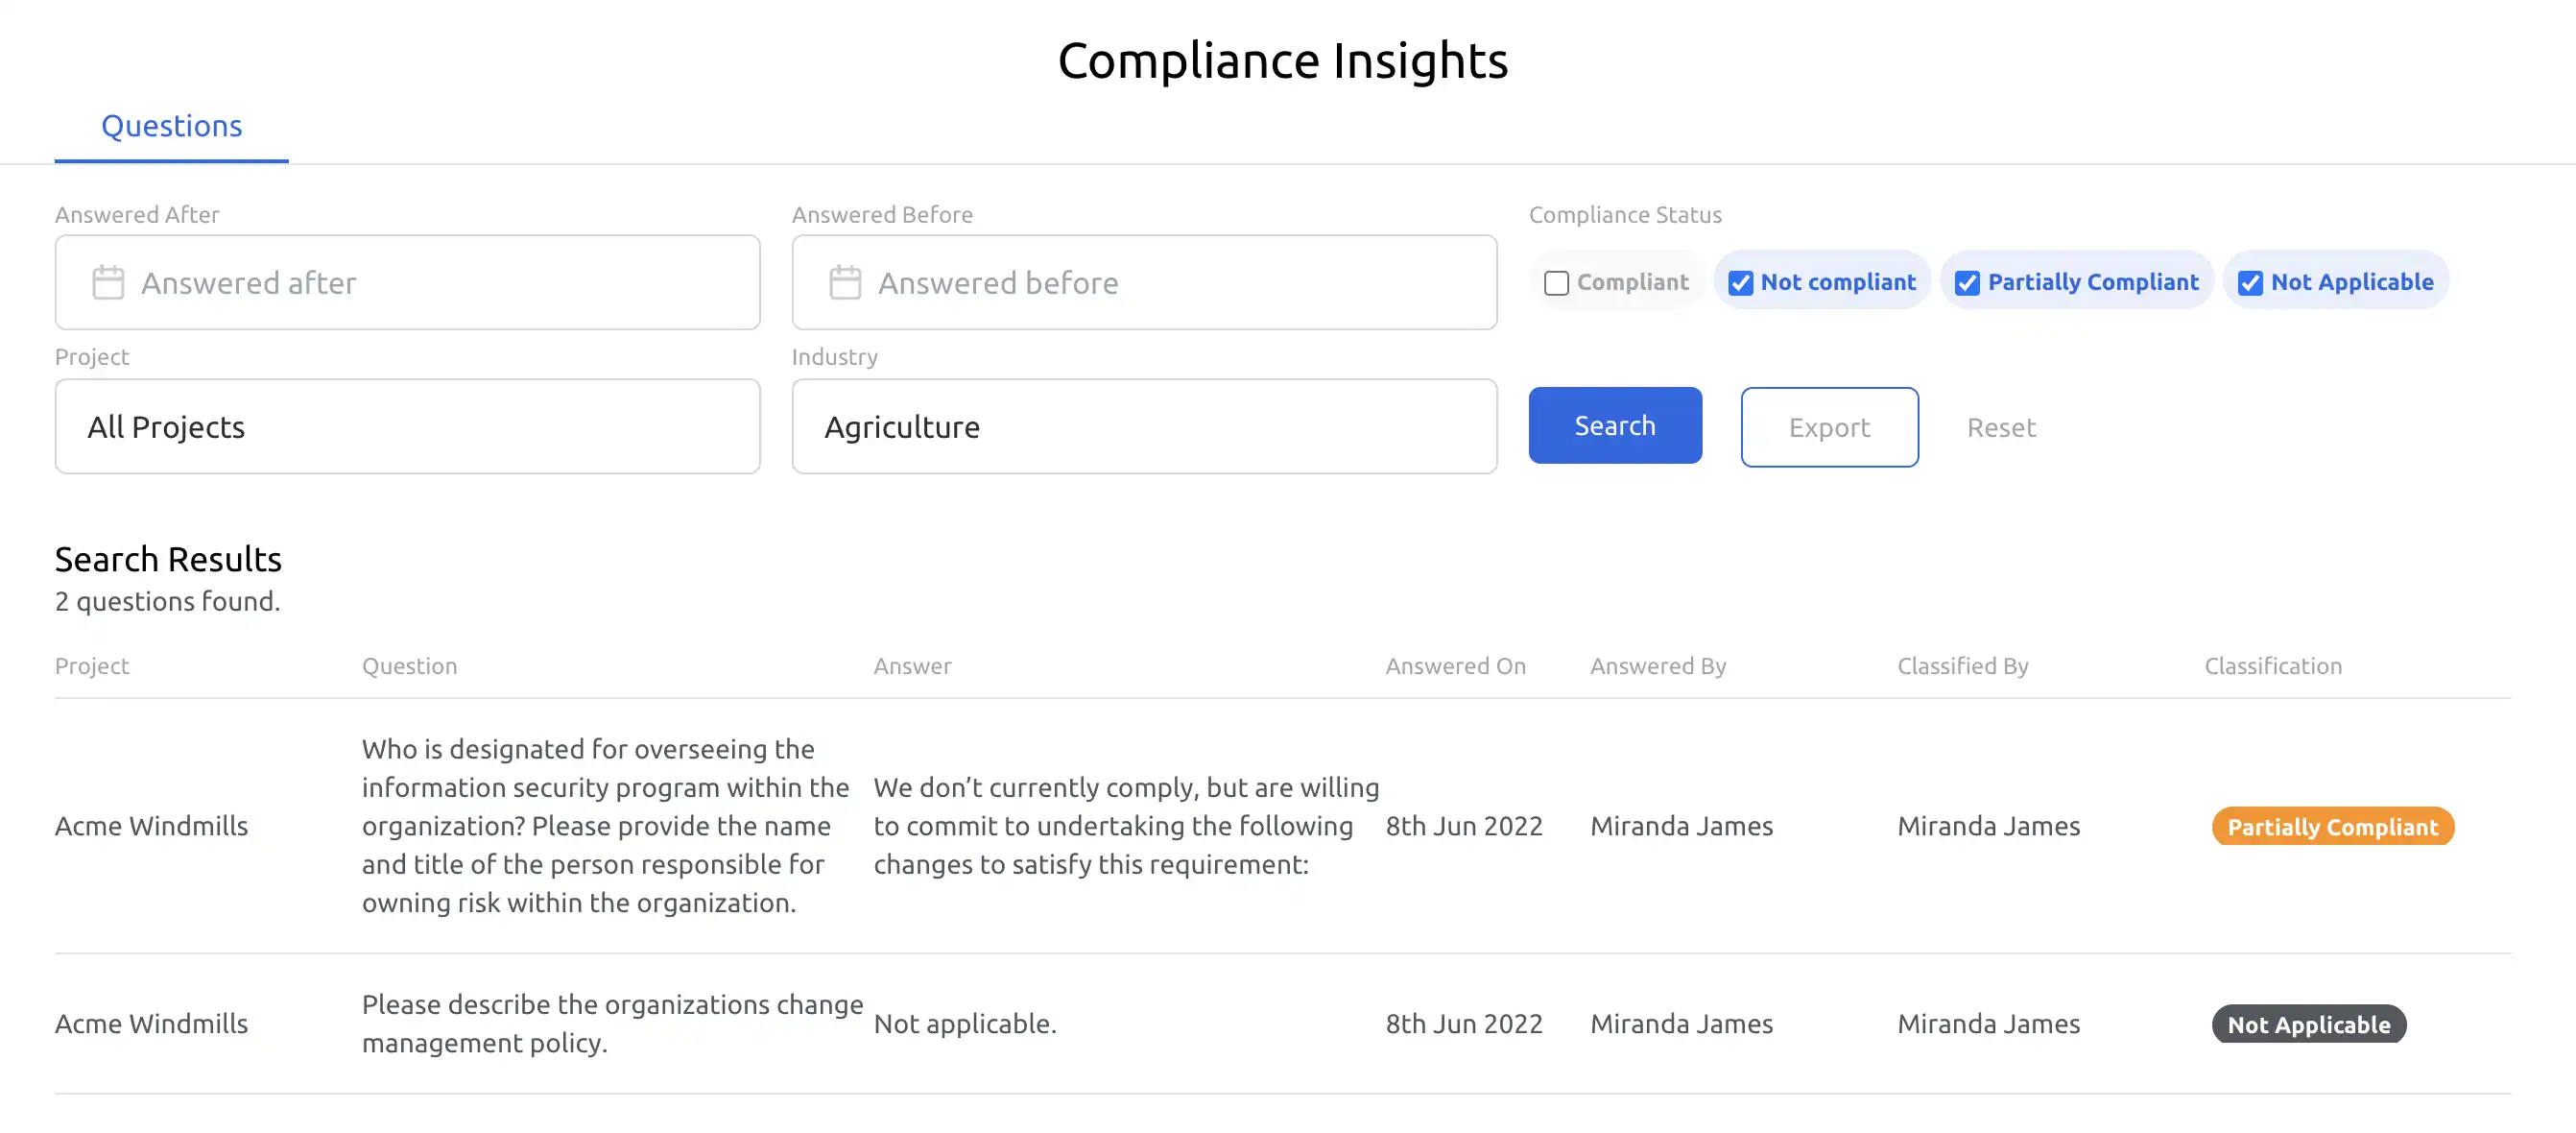 Gain new insights with Compliance Insights